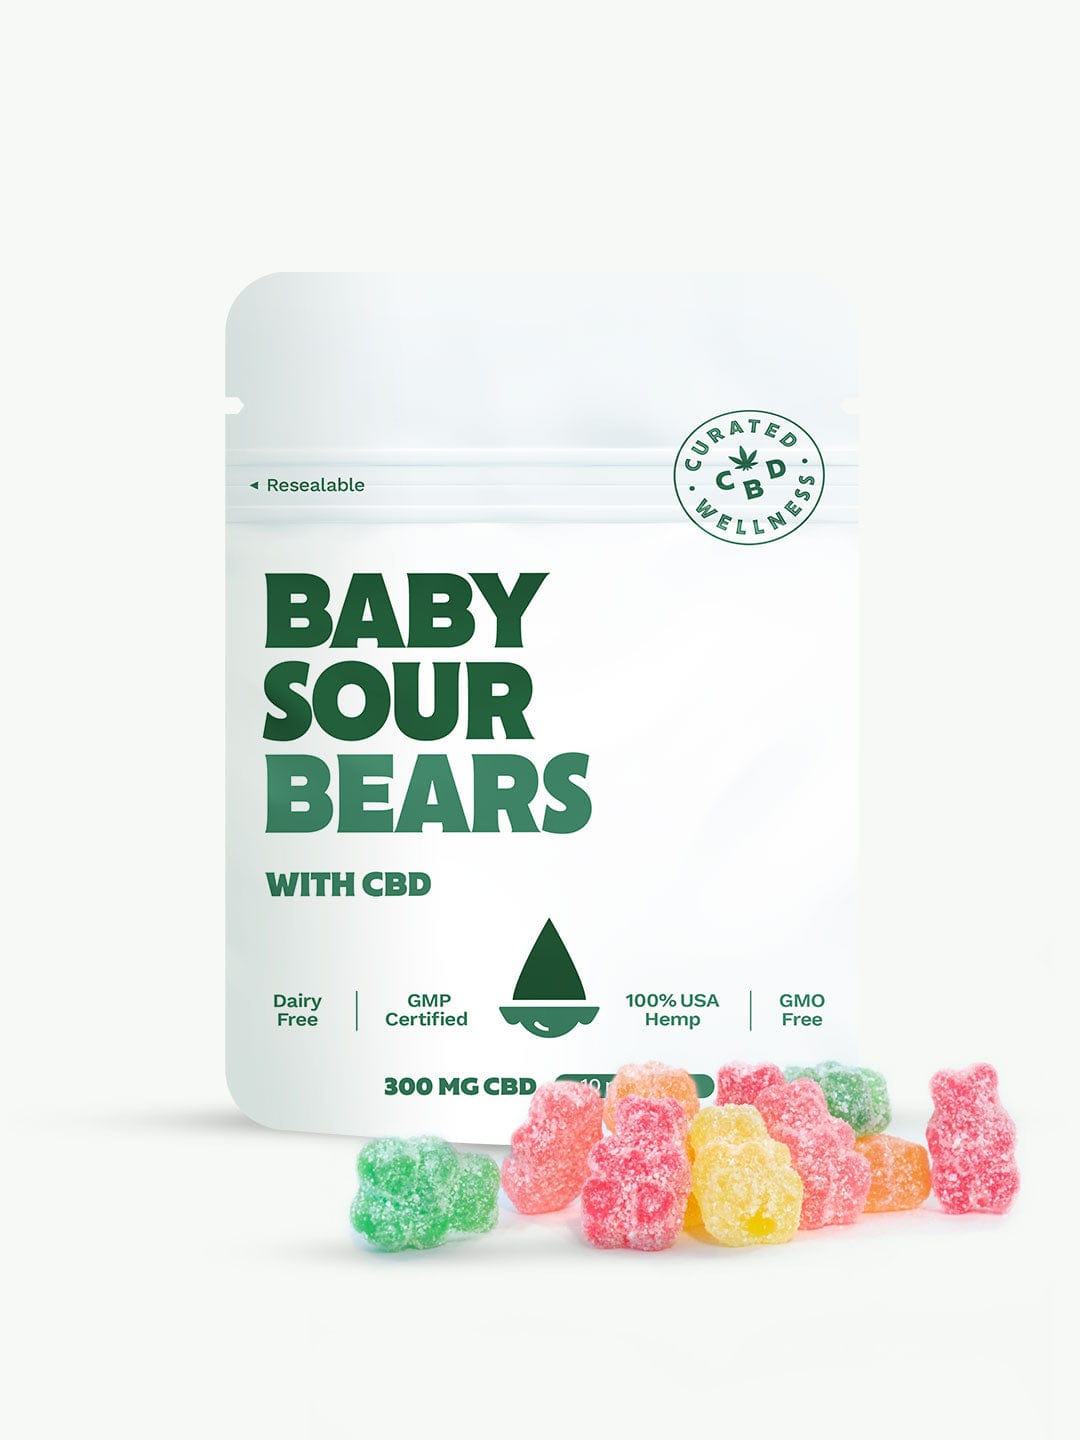 Baby Sour Bears with CBD